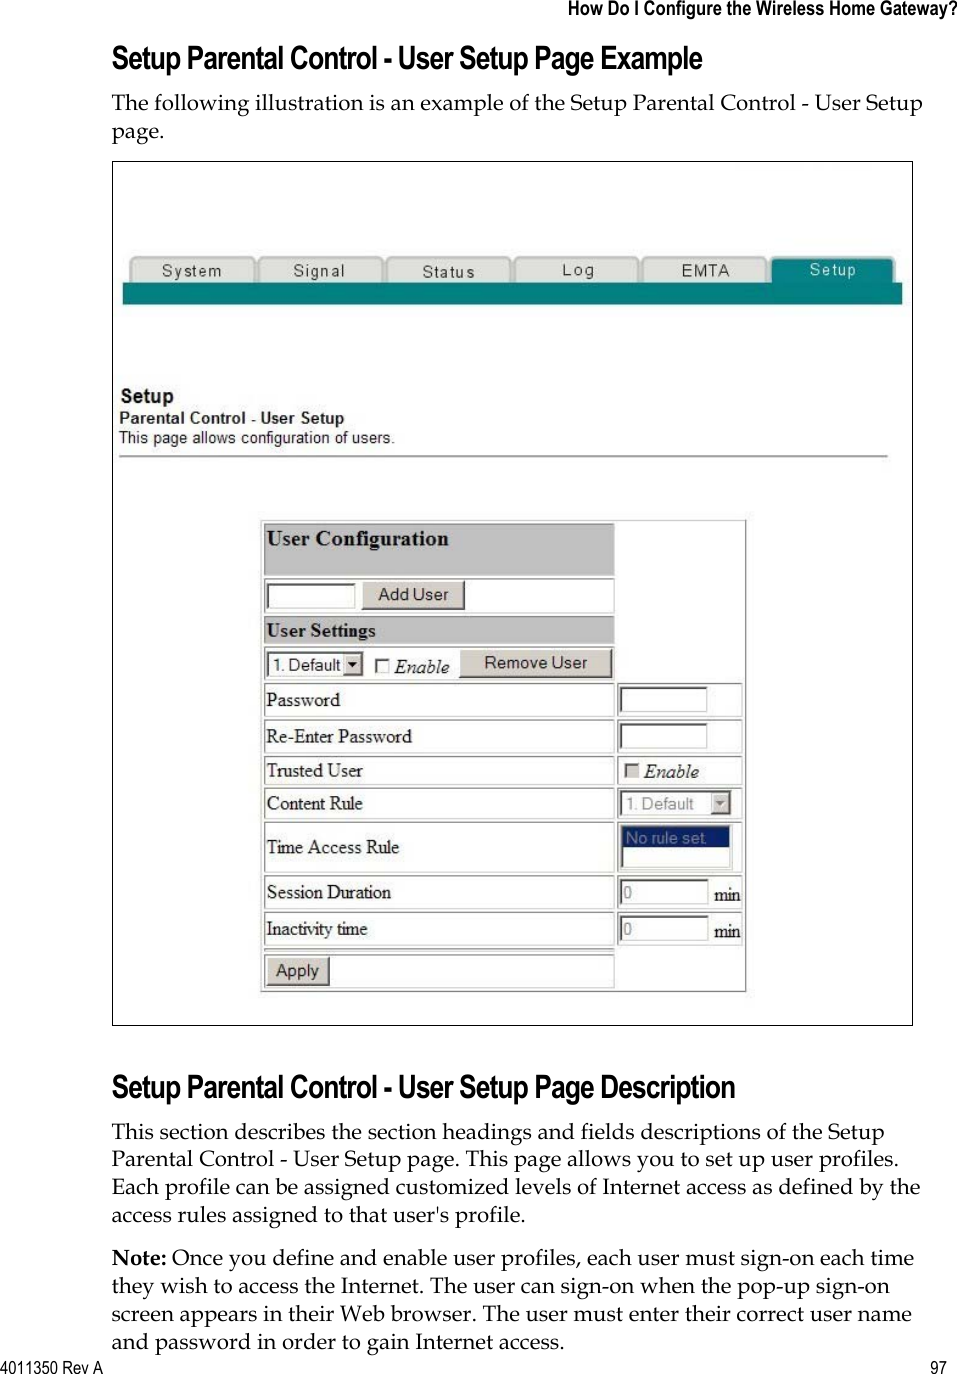 4011350 Rev A    97   How Do I Configure the Wireless Home Gateway?Setup Parental Control - User Setup Page Example The following illustration is an example of the Setup Parental Control - User Setup page.Setup Parental Control - User Setup Page Description This section describes the section headings and fields descriptions of the Setup Parental Control - User Setup page. This page allows you to set up user profiles. Each profile can be assigned customized levels of Internet access as defined by the access rules assigned to that user&apos;s profile. Note: Once you define and enable user profiles, each user must sign-on each time they wish to access the Internet. The user can sign-on when the pop-up sign-on screen appears in their Web browser. The user must enter their correct user name and password in order to gain Internet access. 